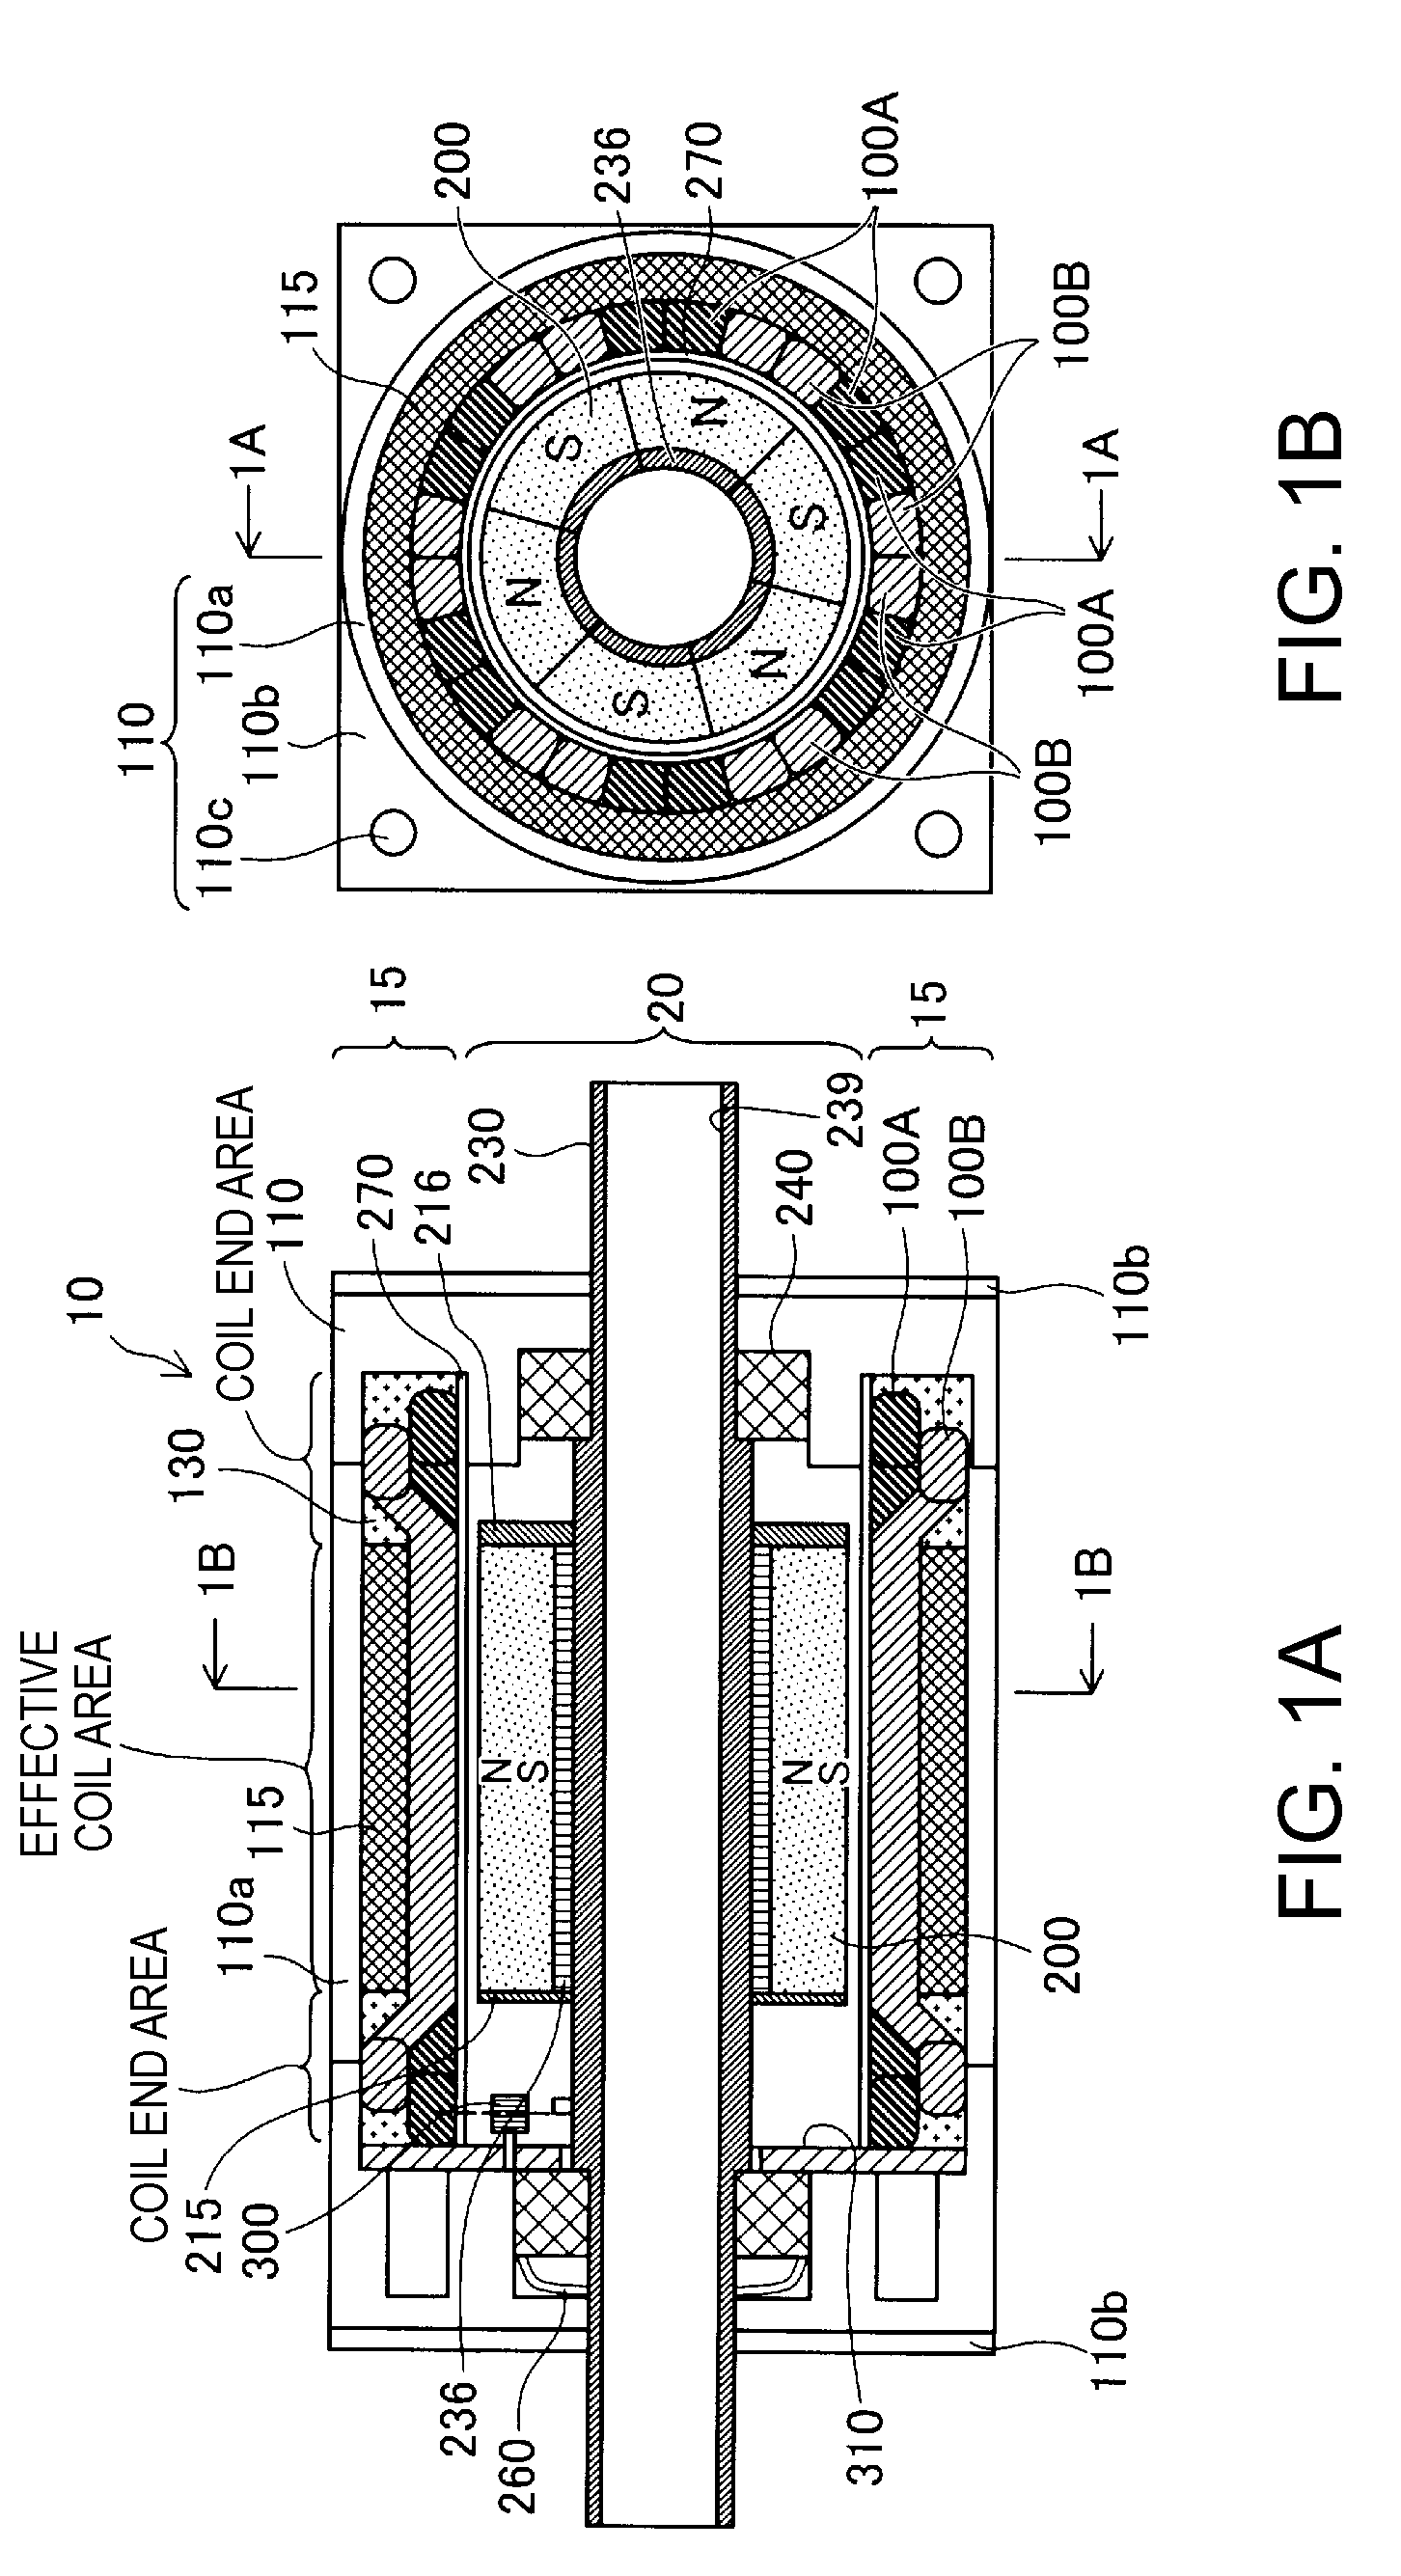 Electromechanical apparatus, robot, and moving body